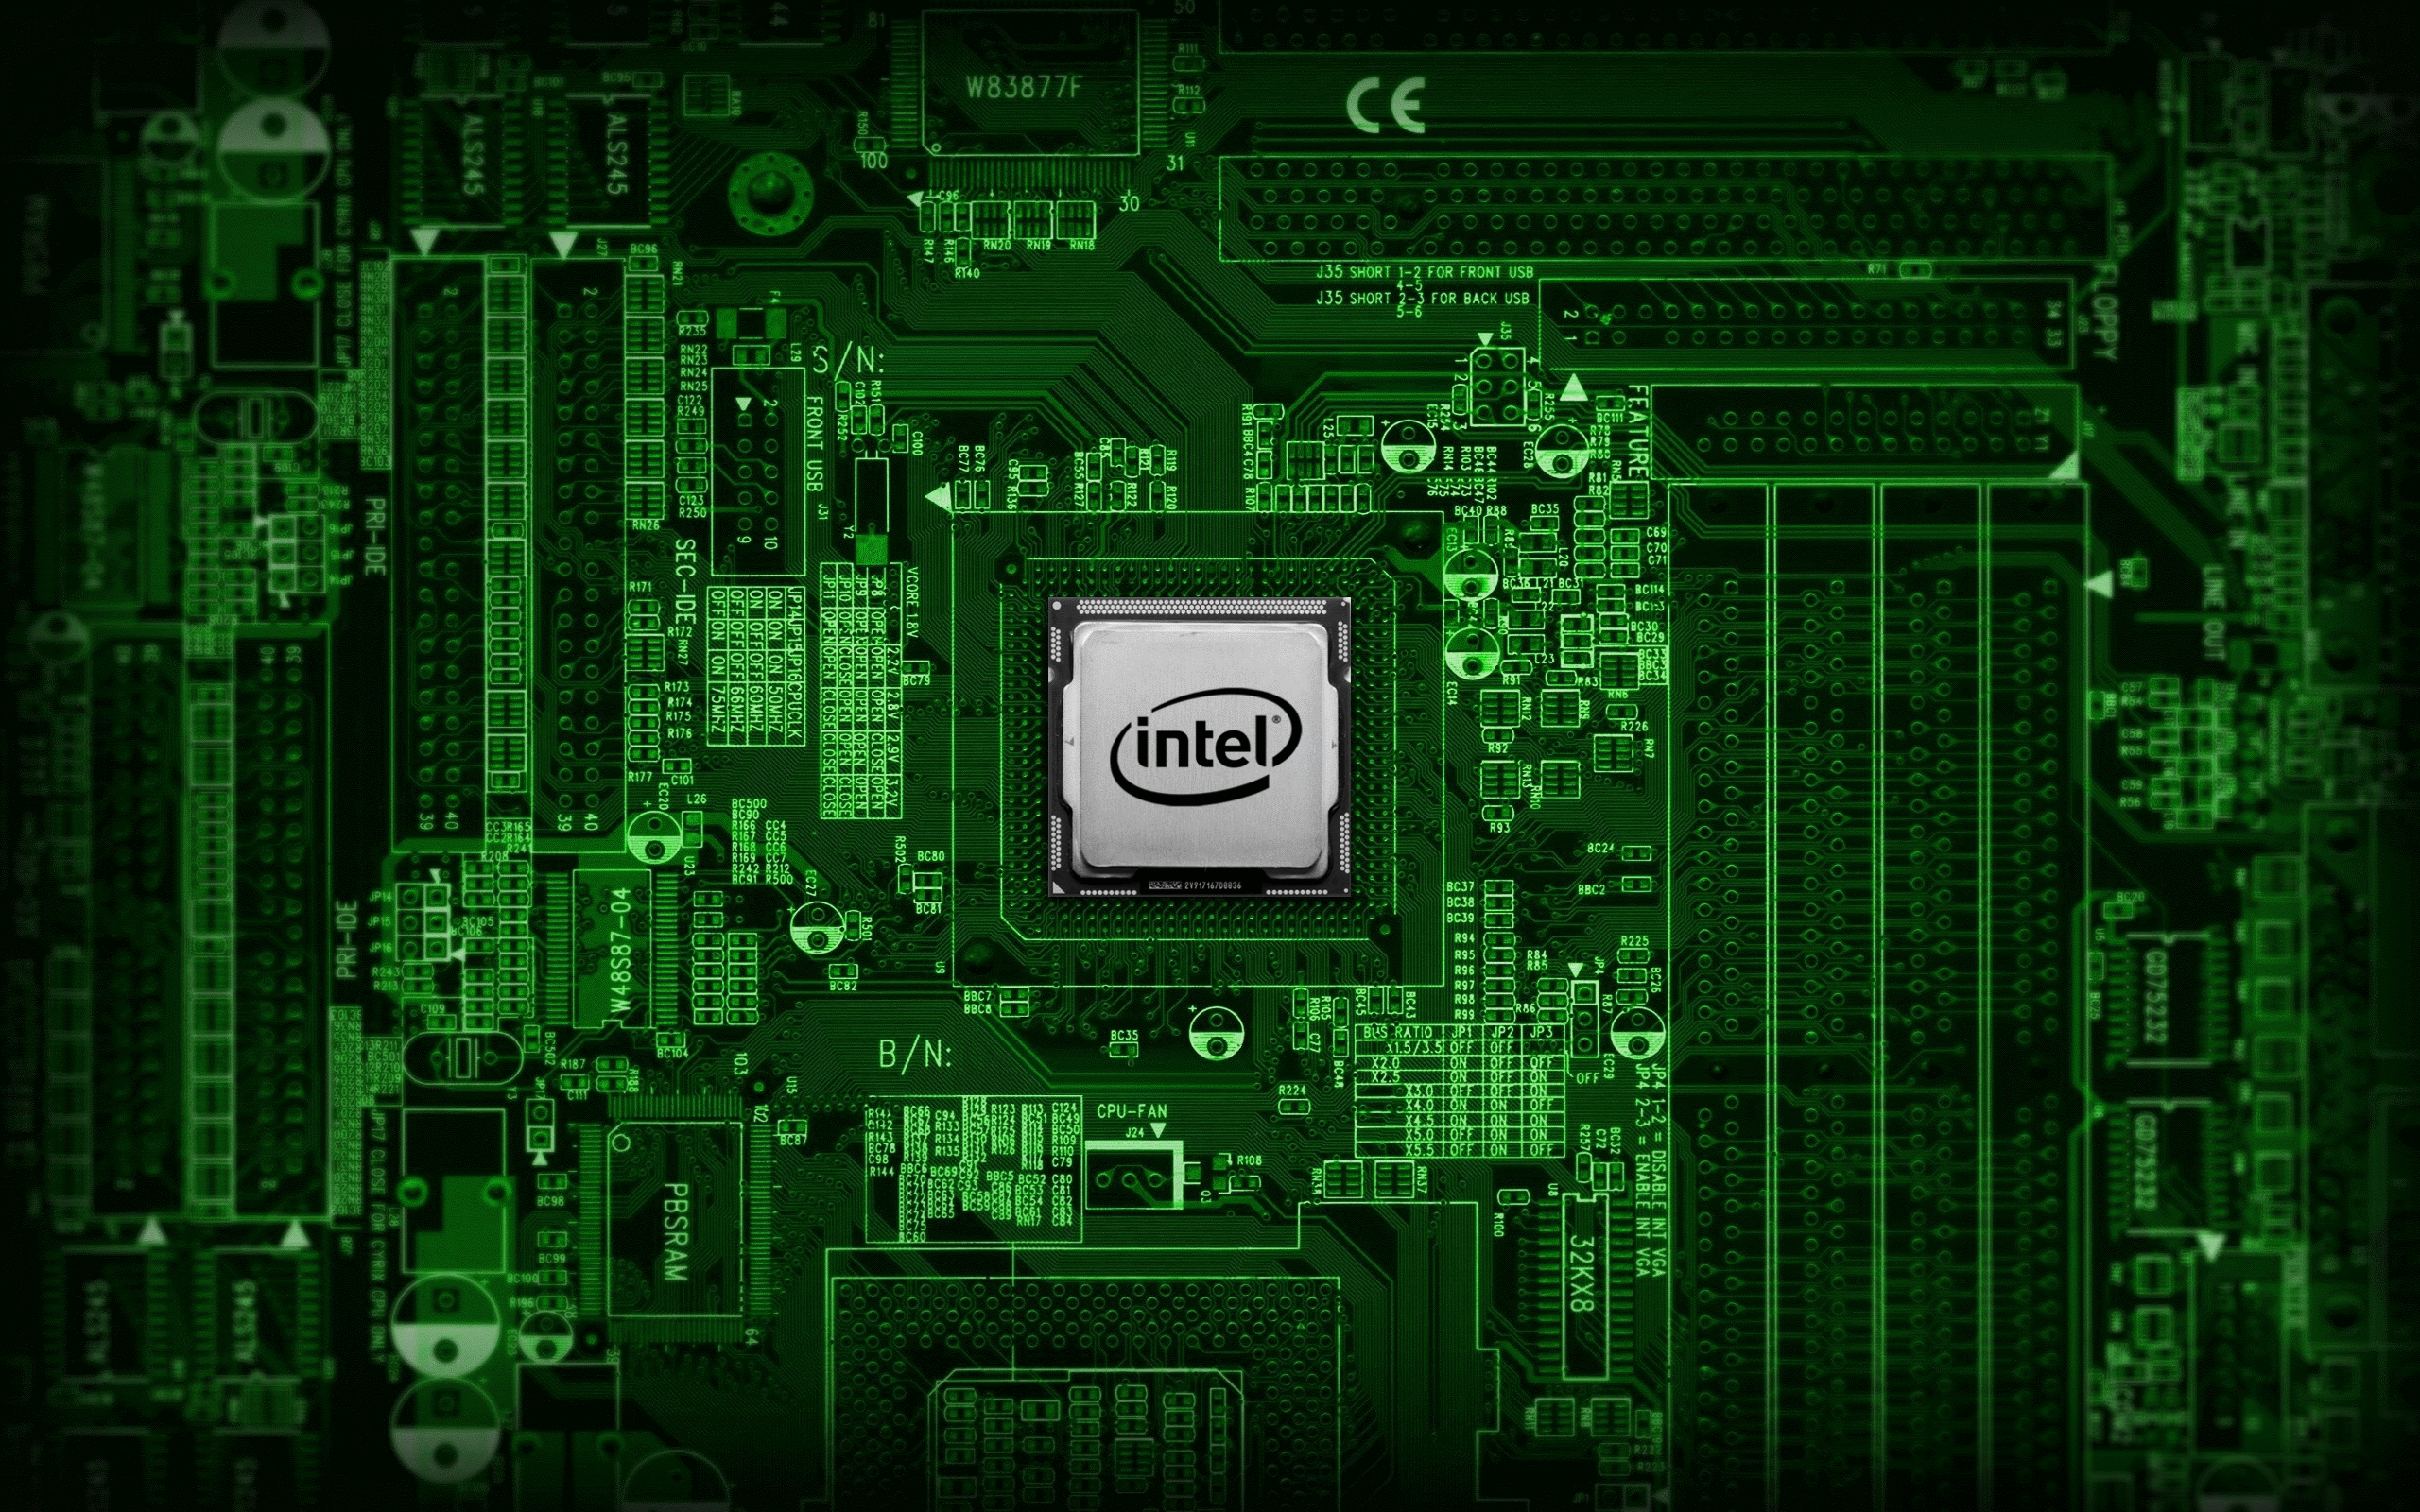 564 Motherboard Wallpaper Stock Video Footage - 4K and HD Video Clips |  Shutterstock